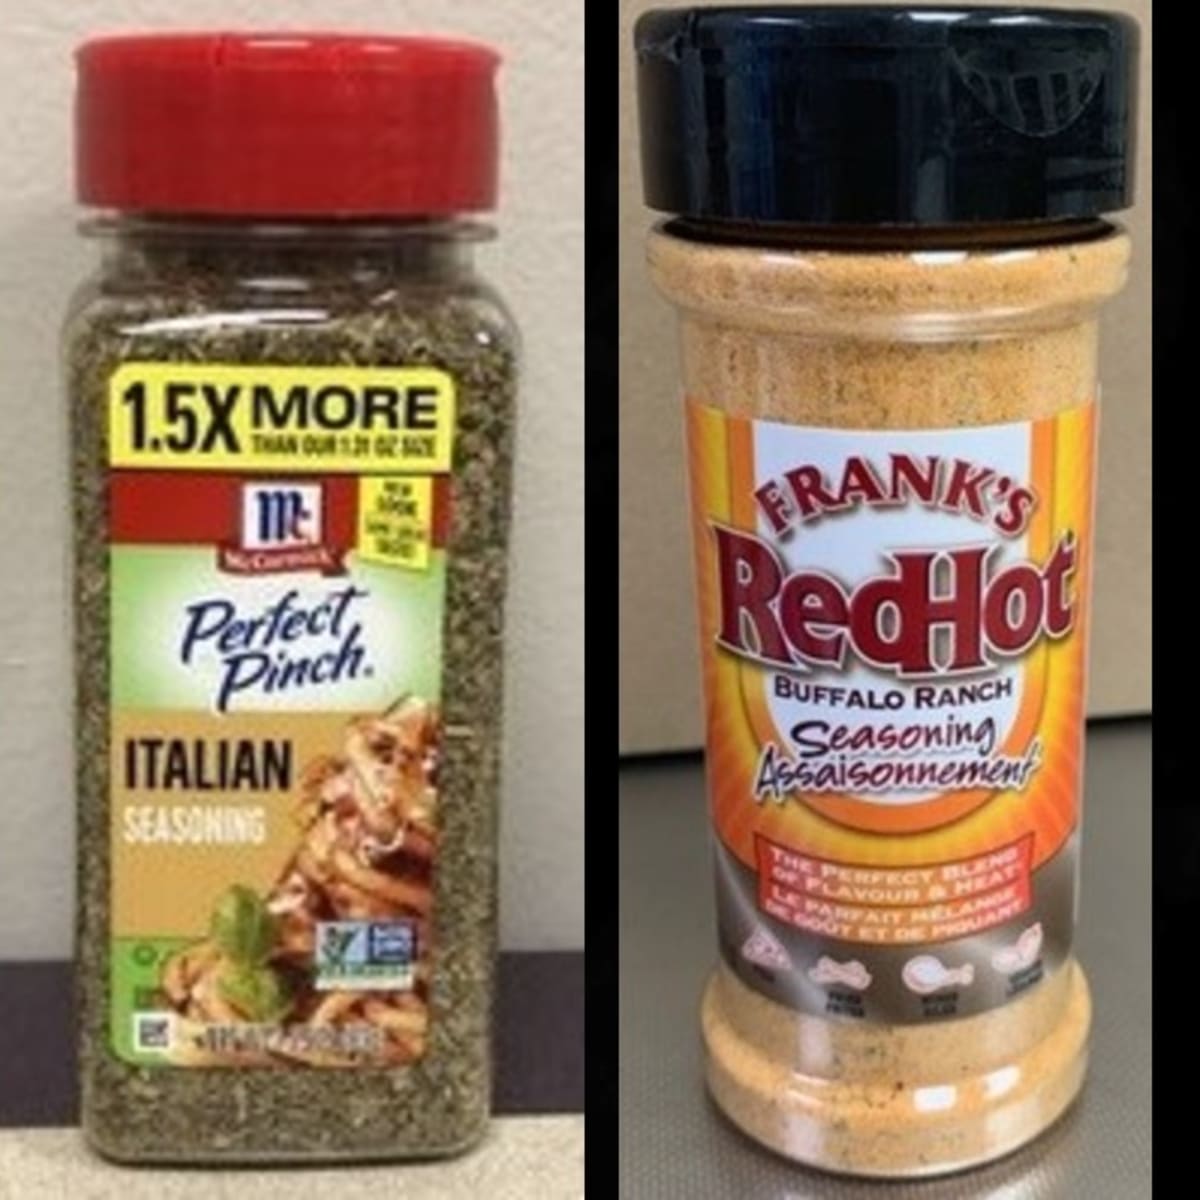 McCormick recalled 3 seasonings due to salmonella. See the list